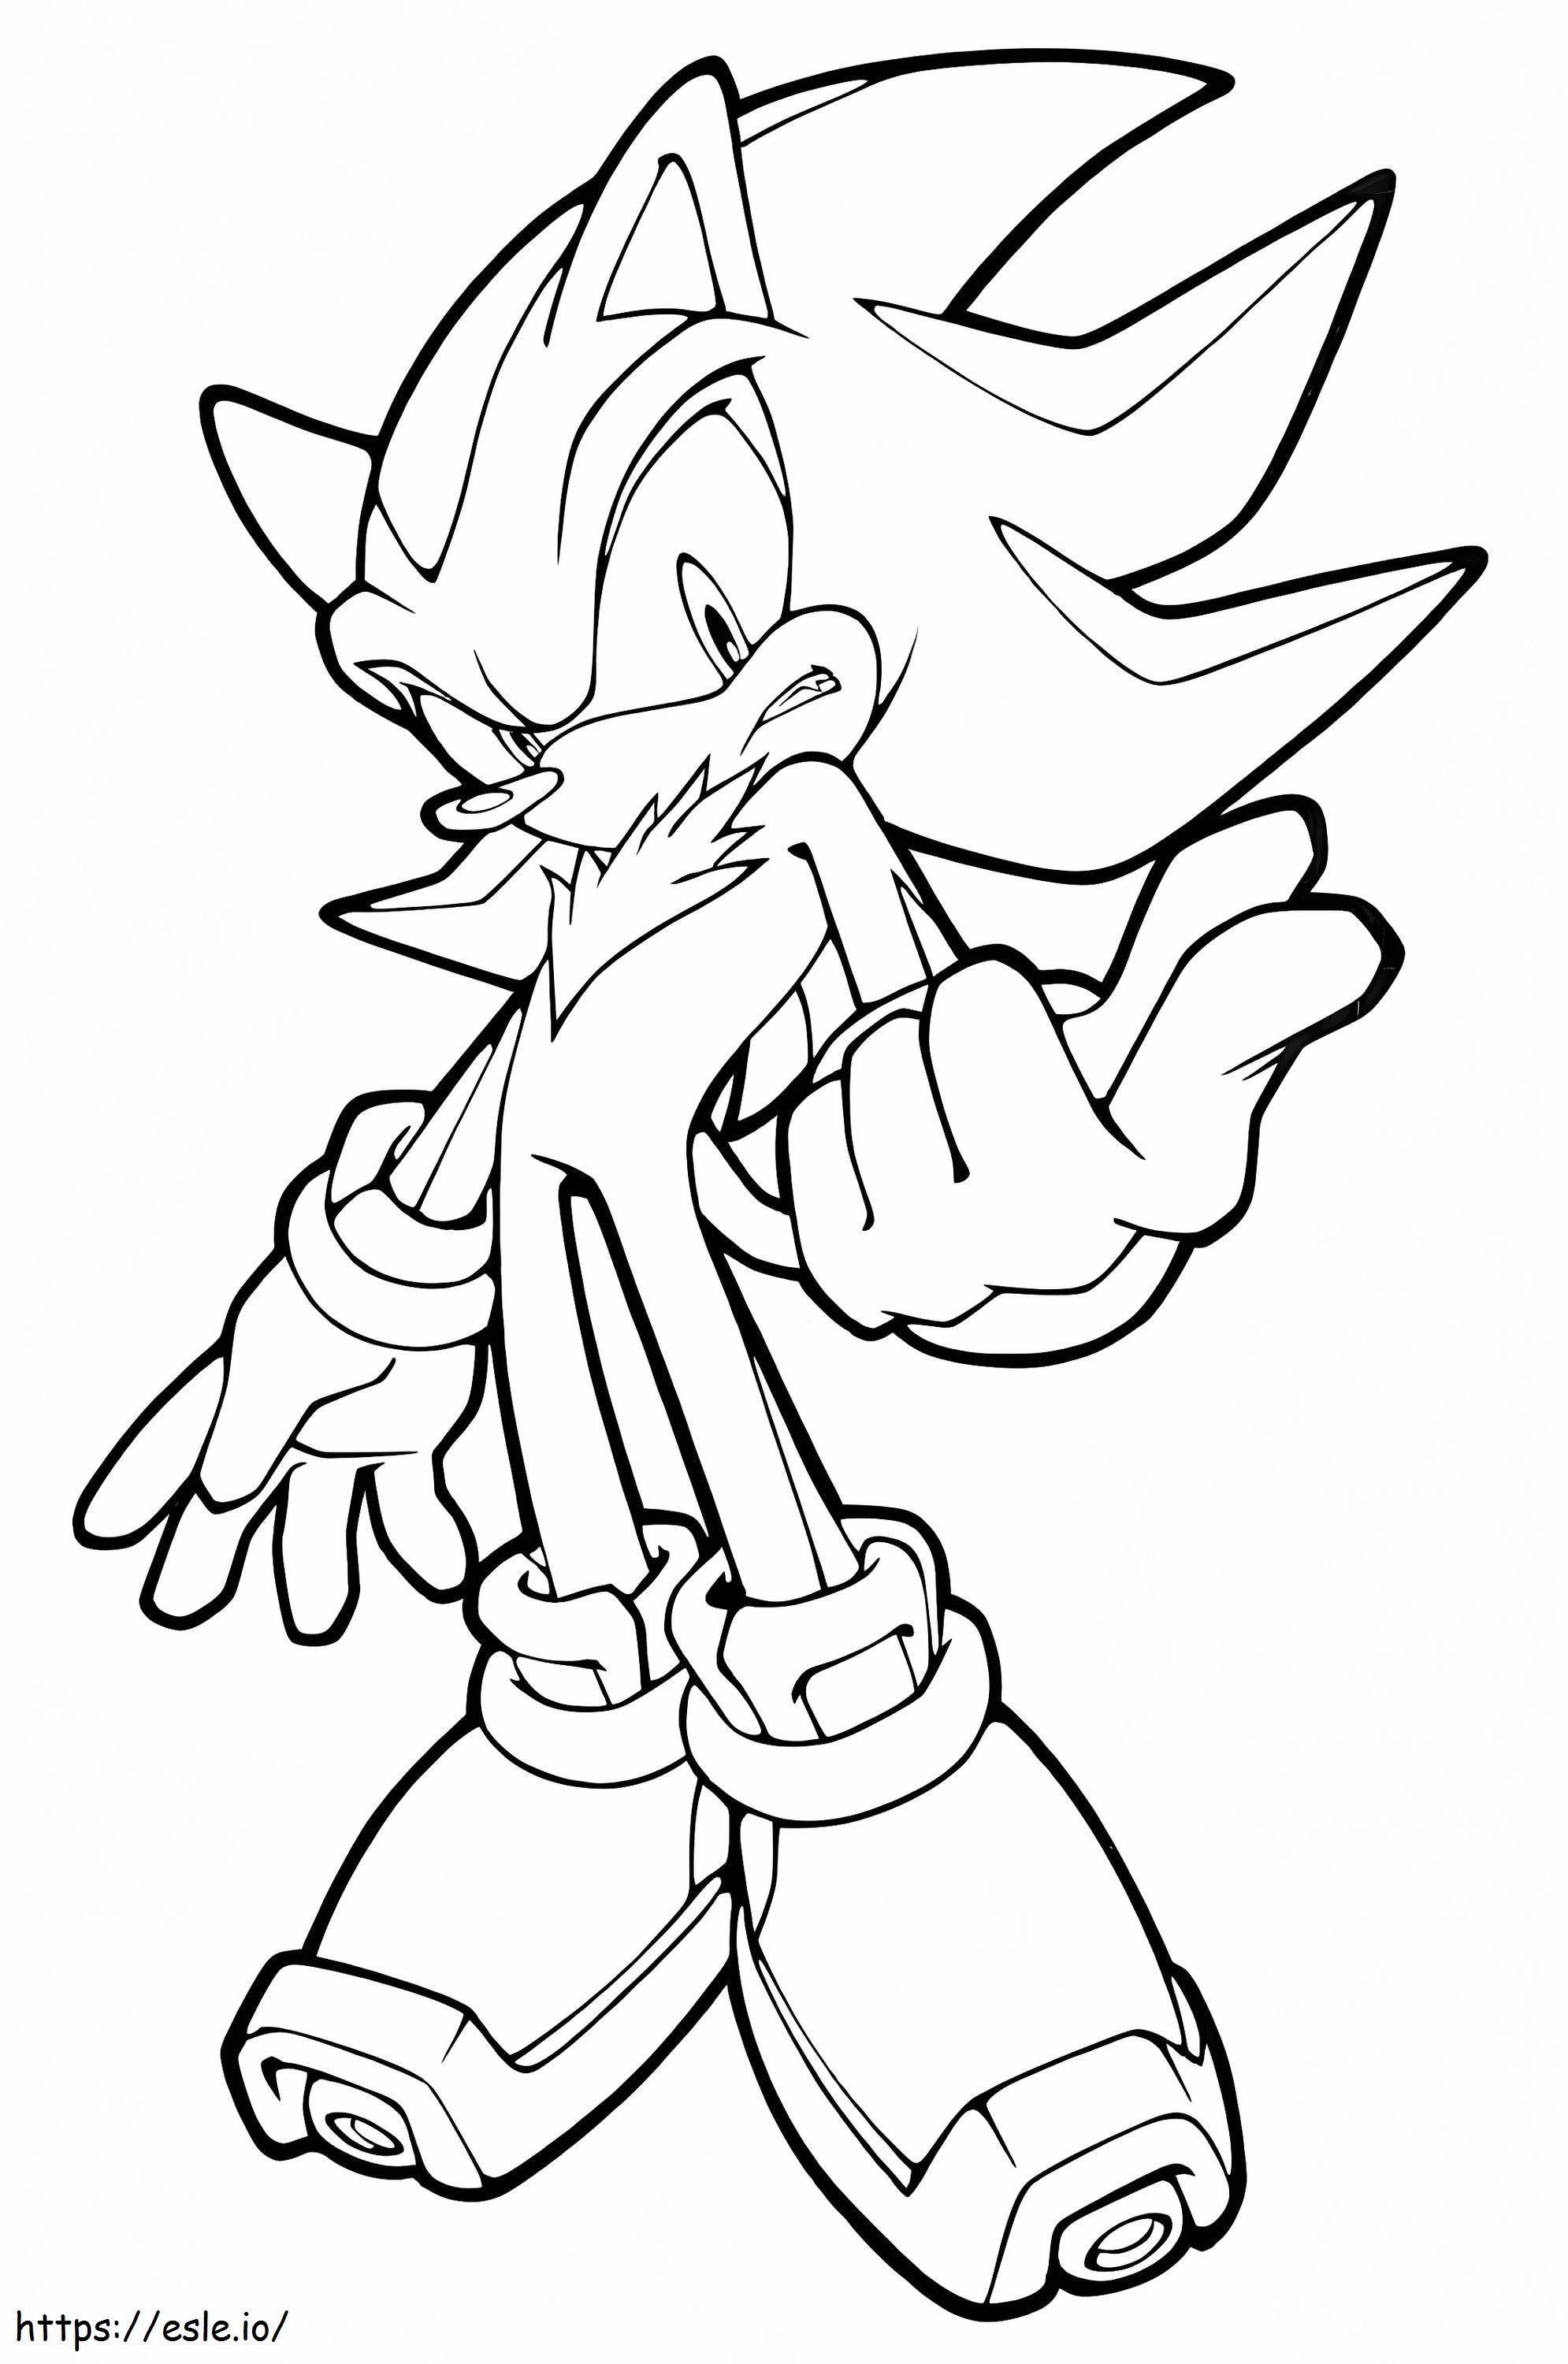 Very Angry Shadow The Hedgehog coloring page